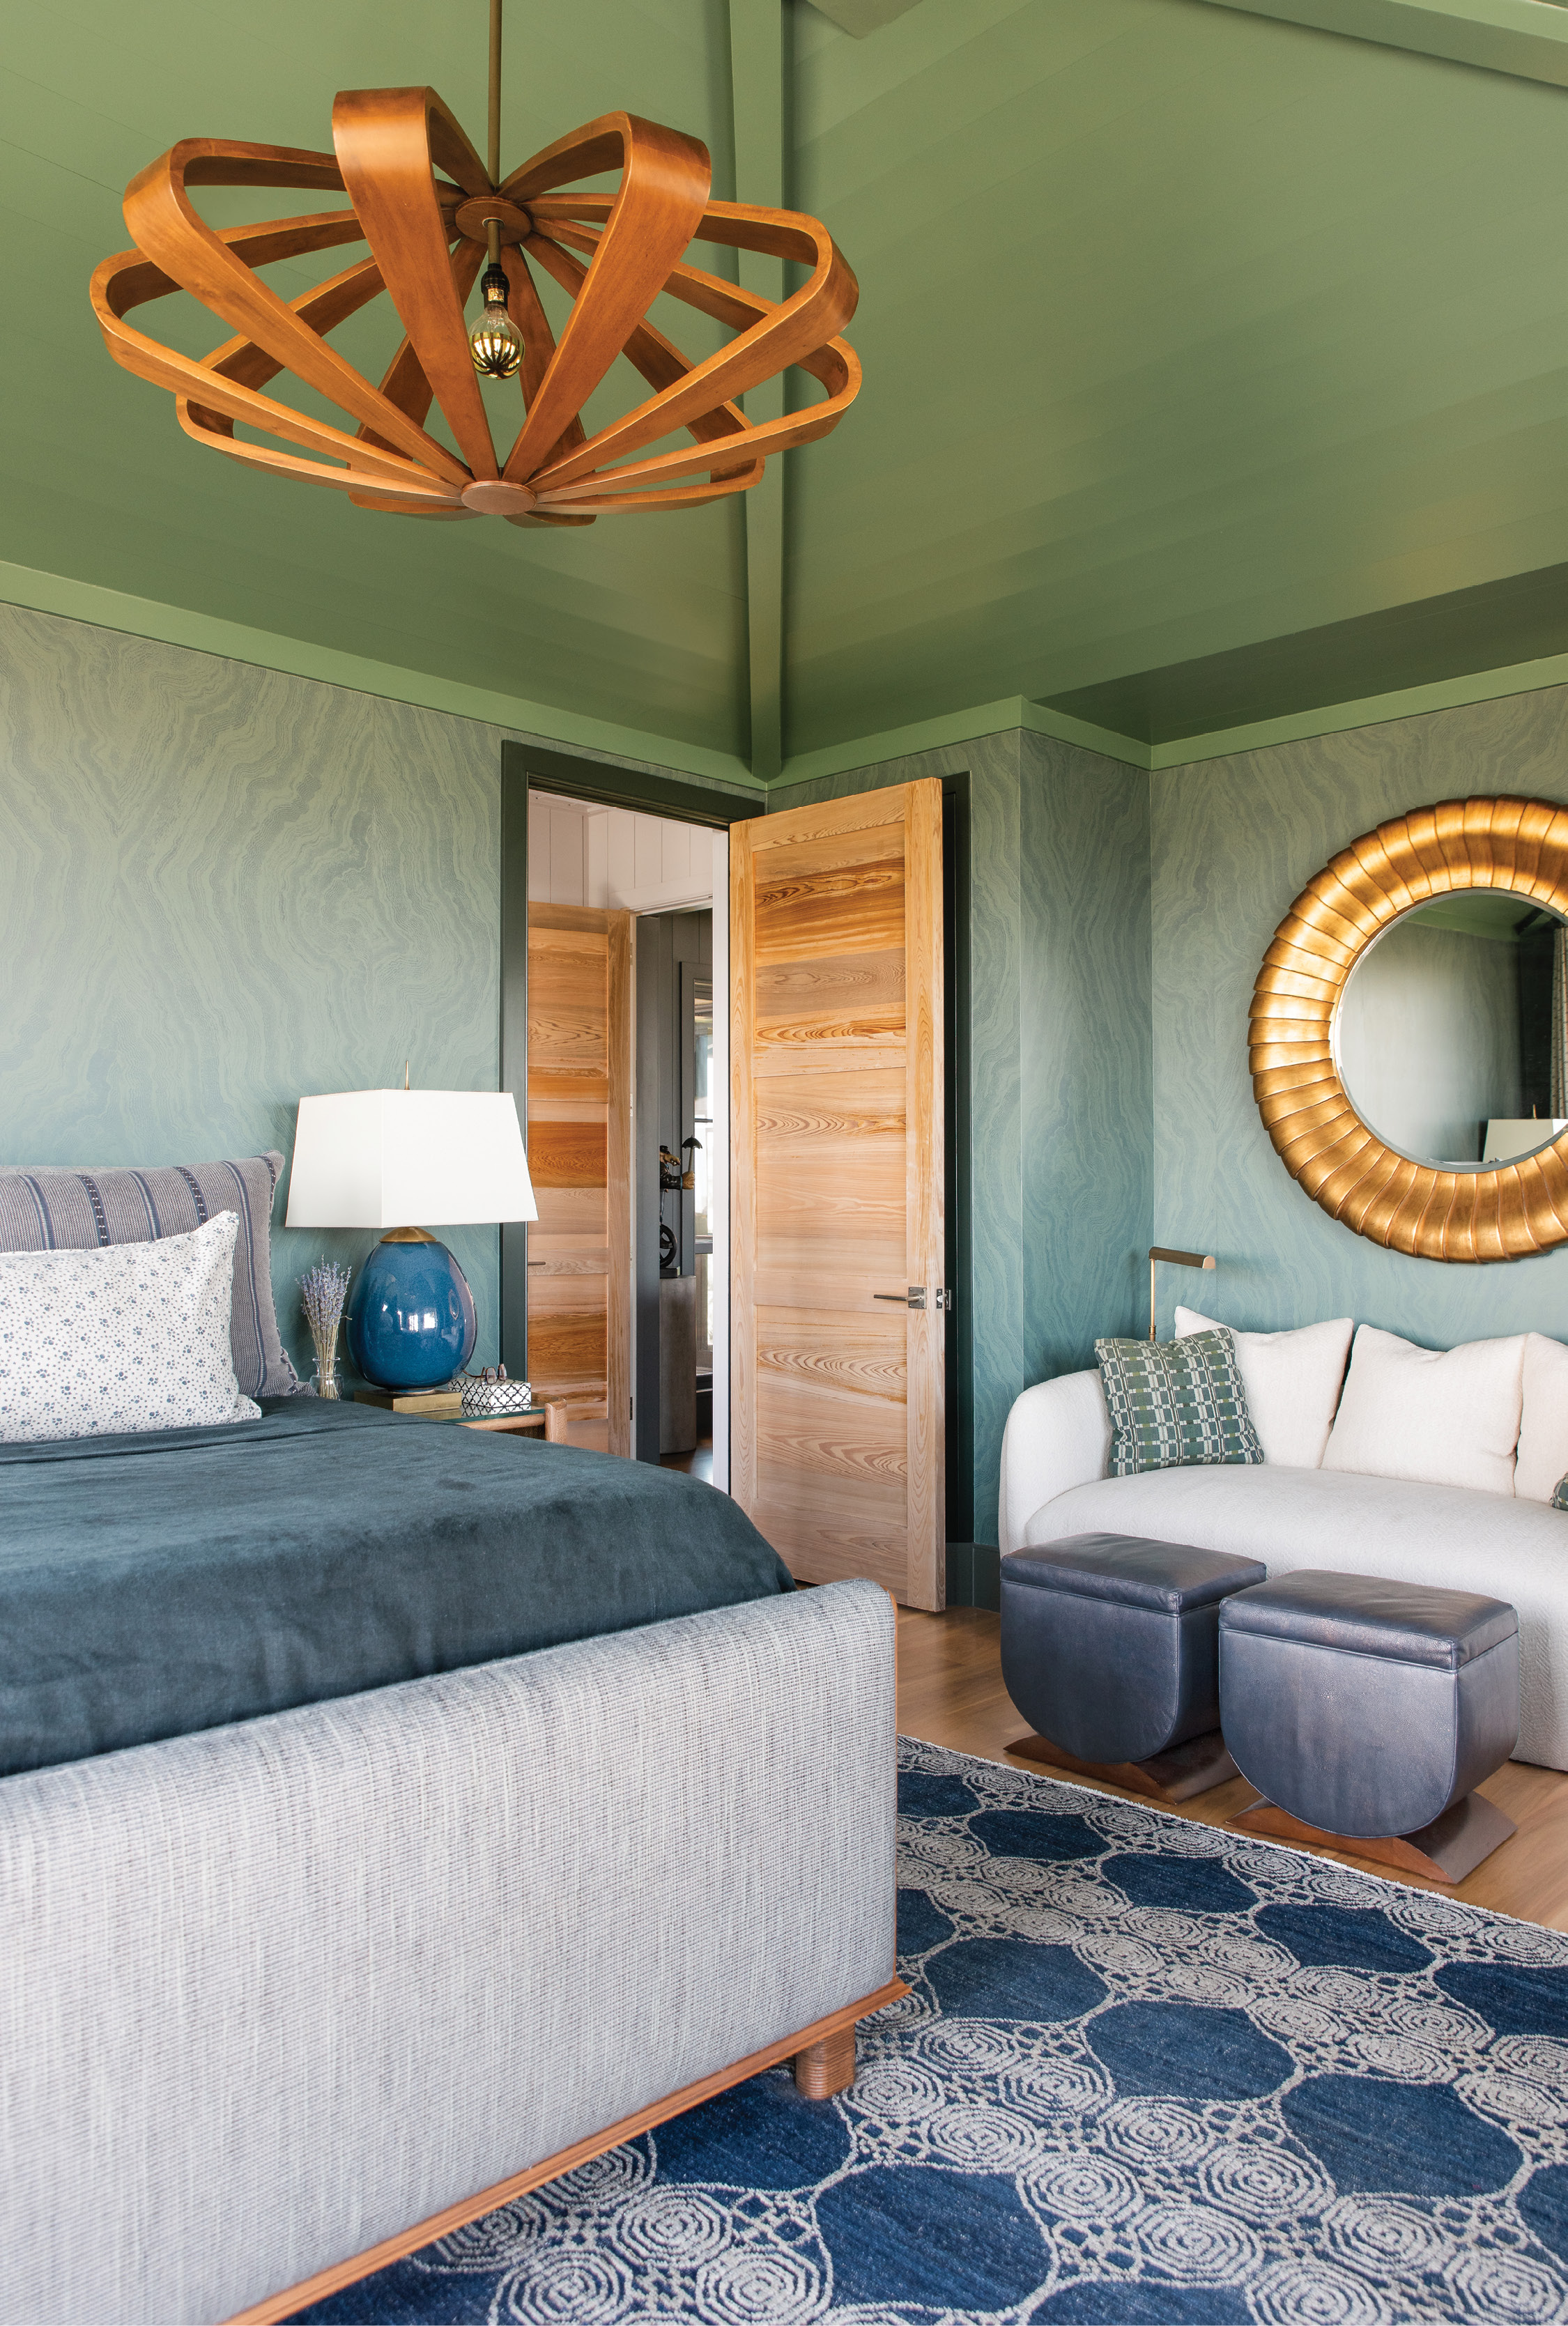 Into the Deep: A wood ceiling painted in a custom green hue encapsulates this cozy master bedroom, replete in deep blues that mimic the ocean beyond. A sunken cypress door and the “Remus” saucer pendant light by Arteriors contrast with the wallpaper, designed by Apparatus in collaboration with ZAK+FOX, that provides a soothing backdrop for a peaceful night’s rest.